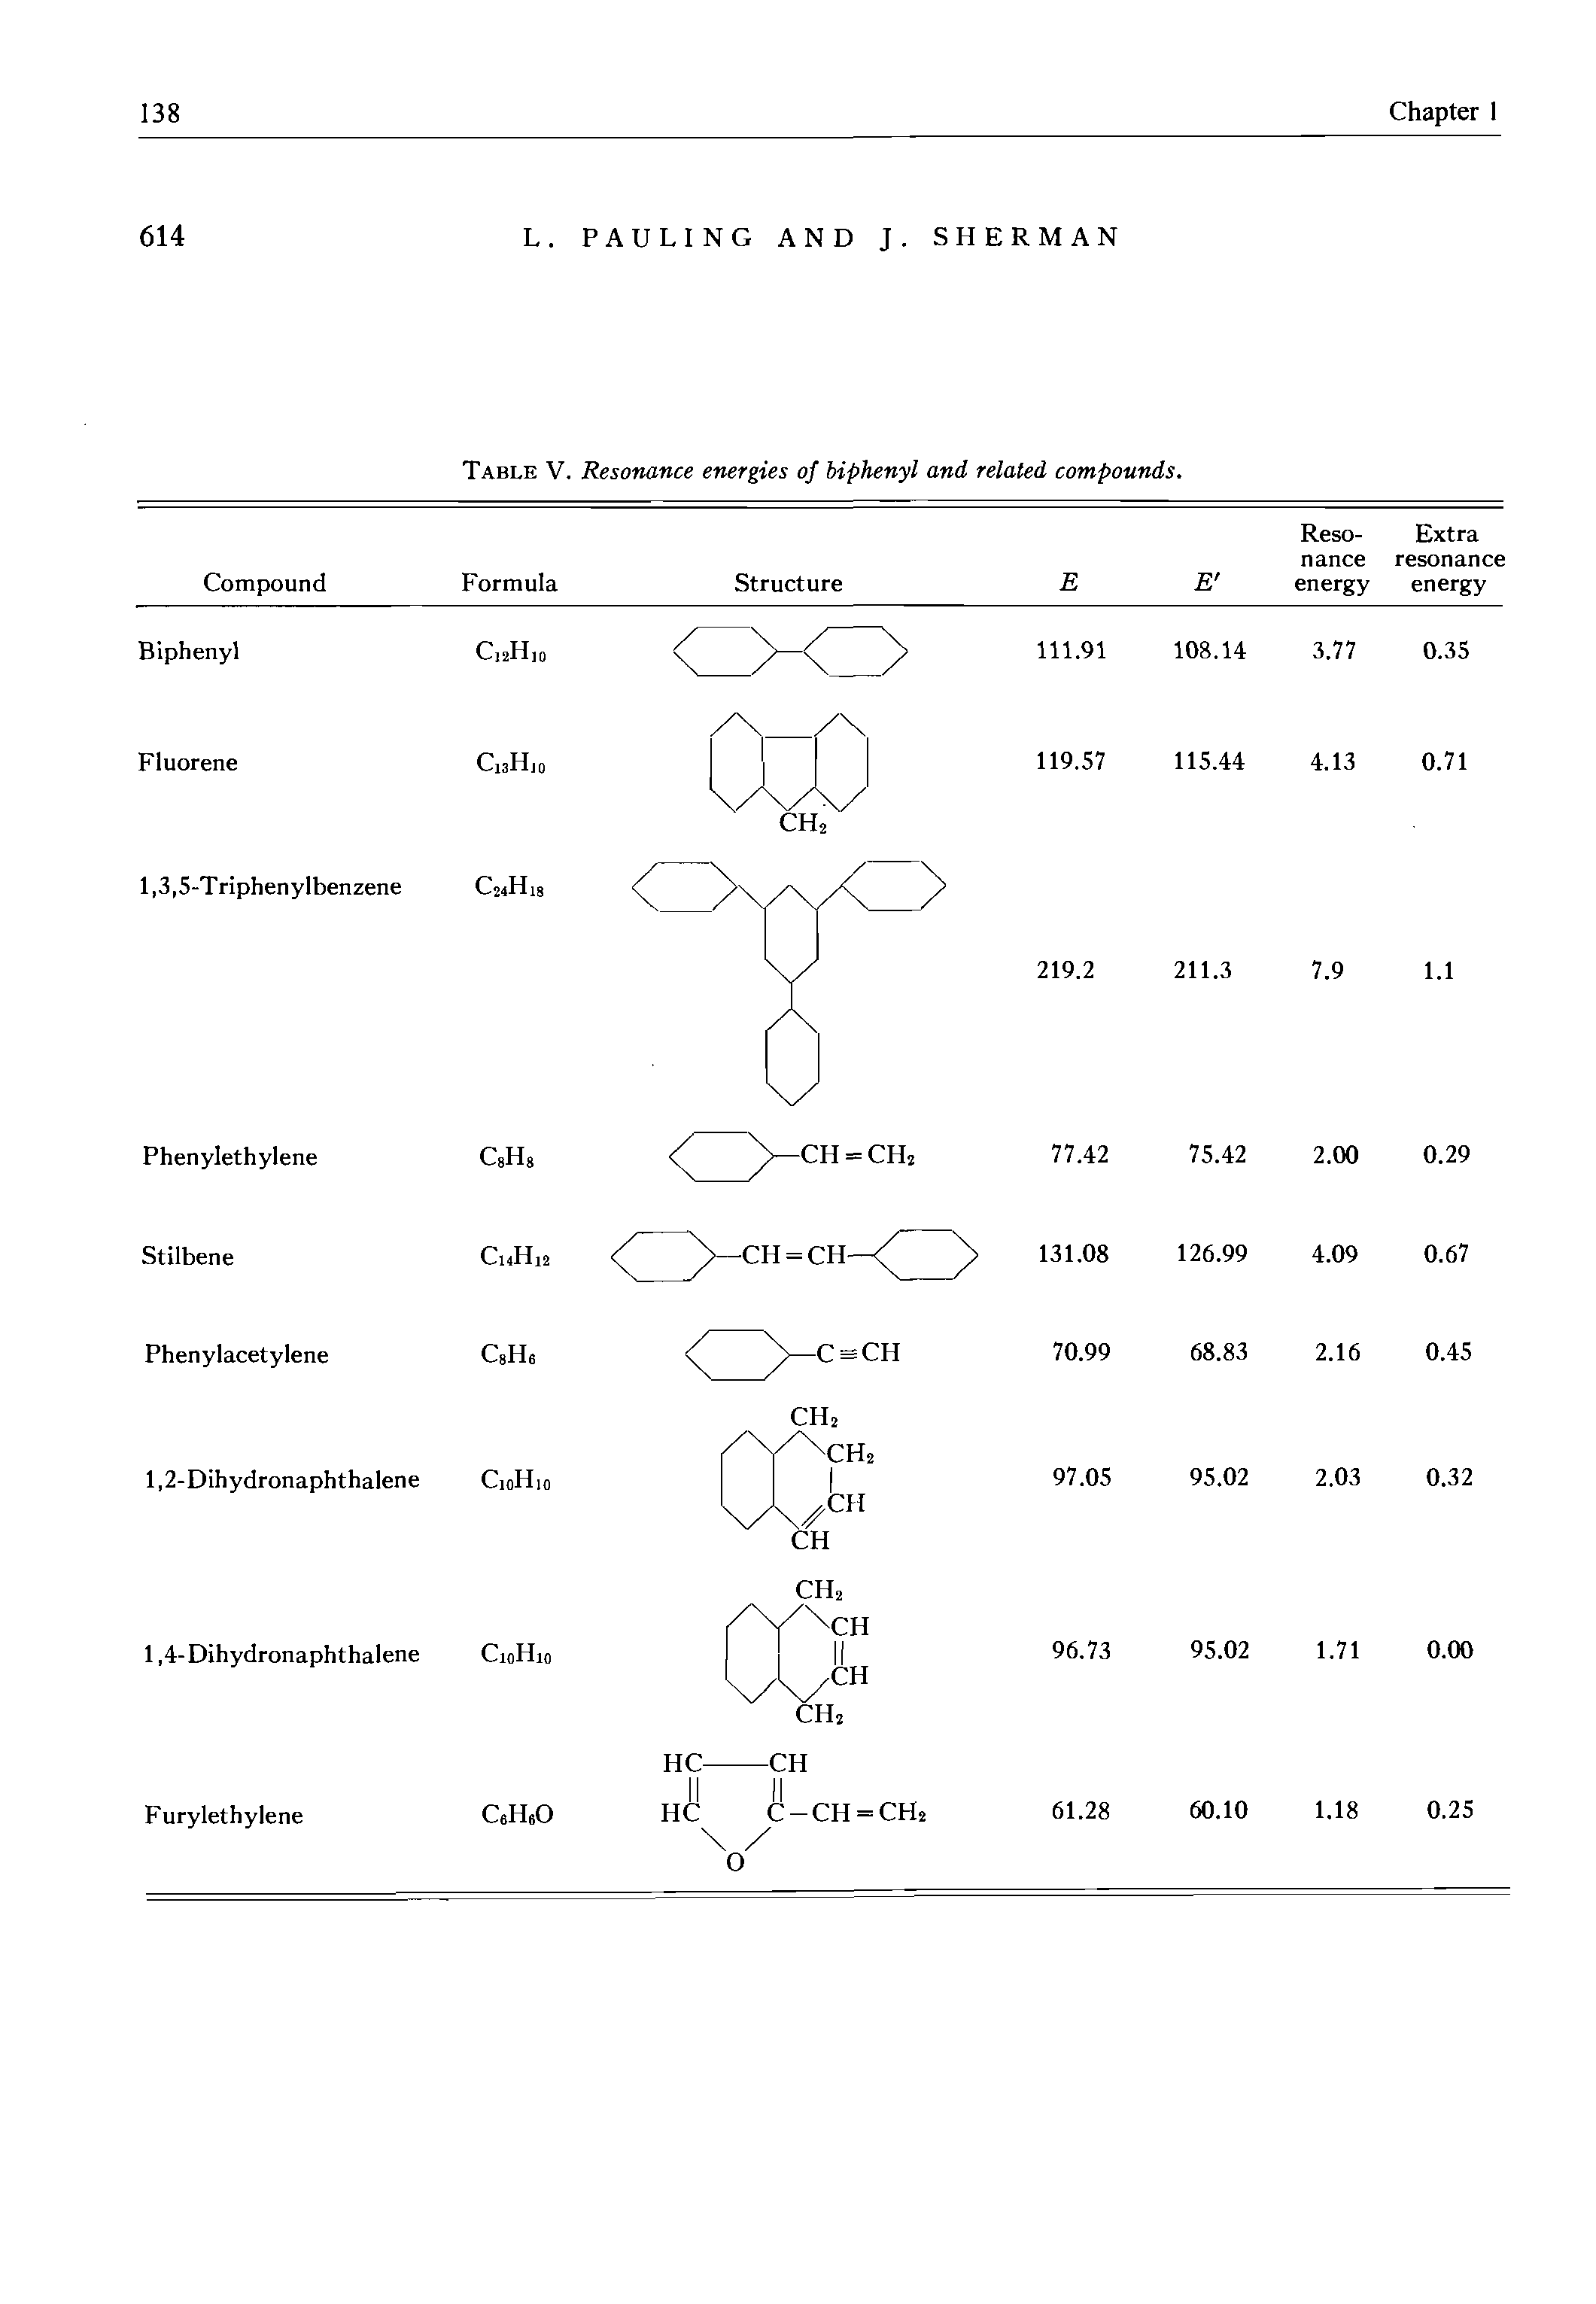 Table V. Resonance energies of biphenyl and related compounds.